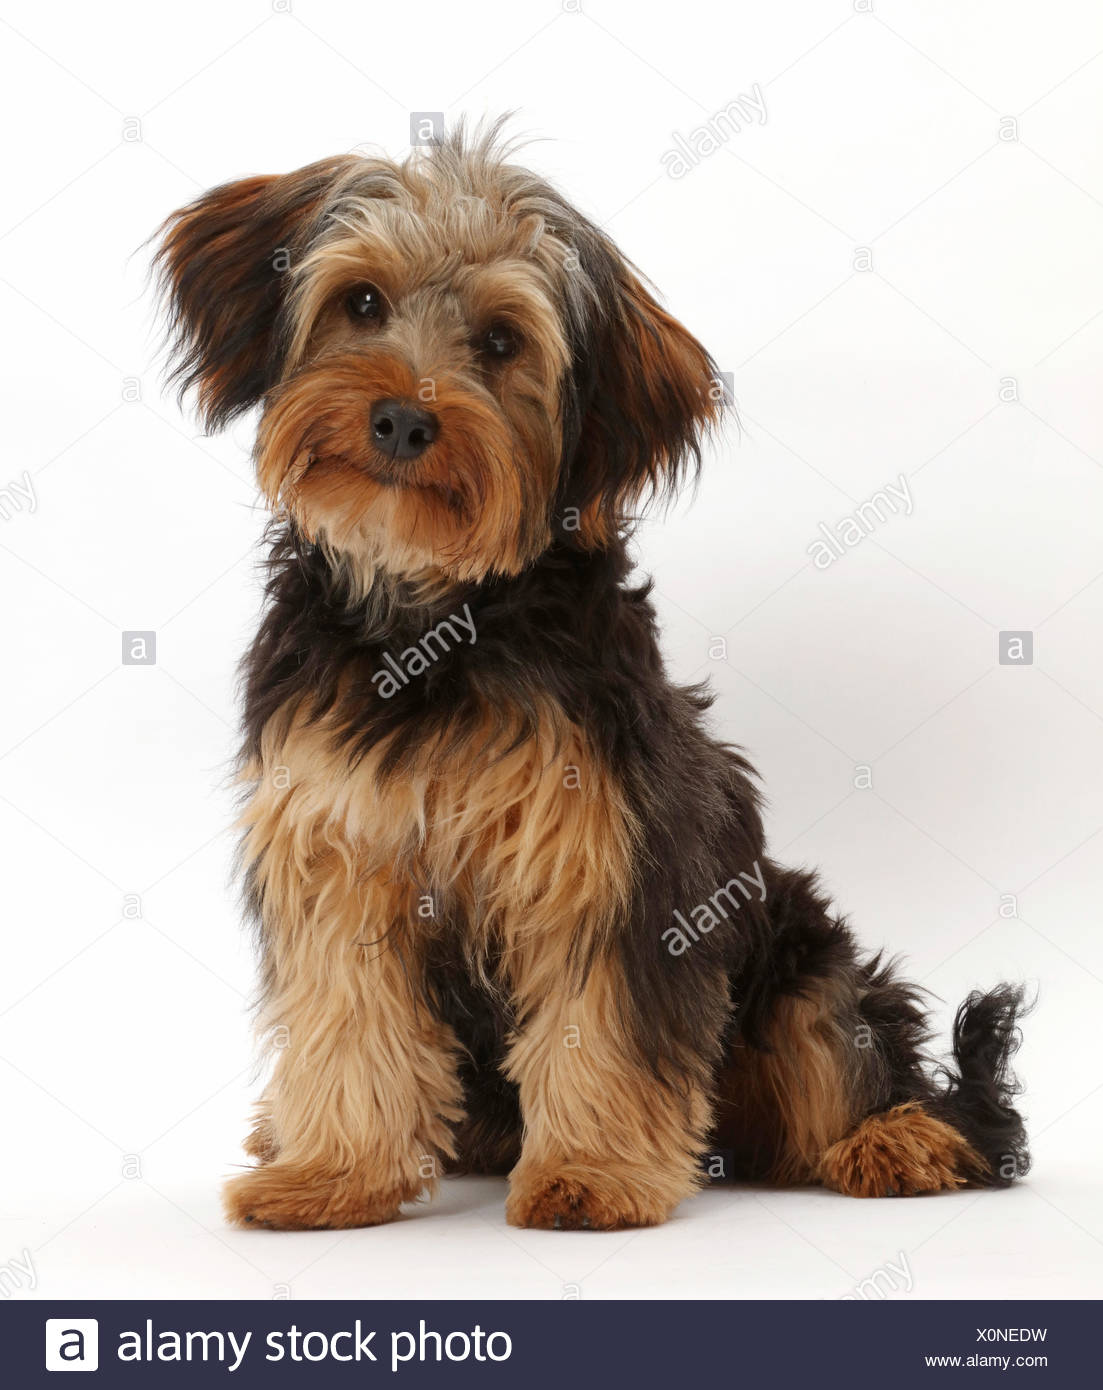 Yorkshire Terrier Cross High Resolution Stock Photography And Images Alamy